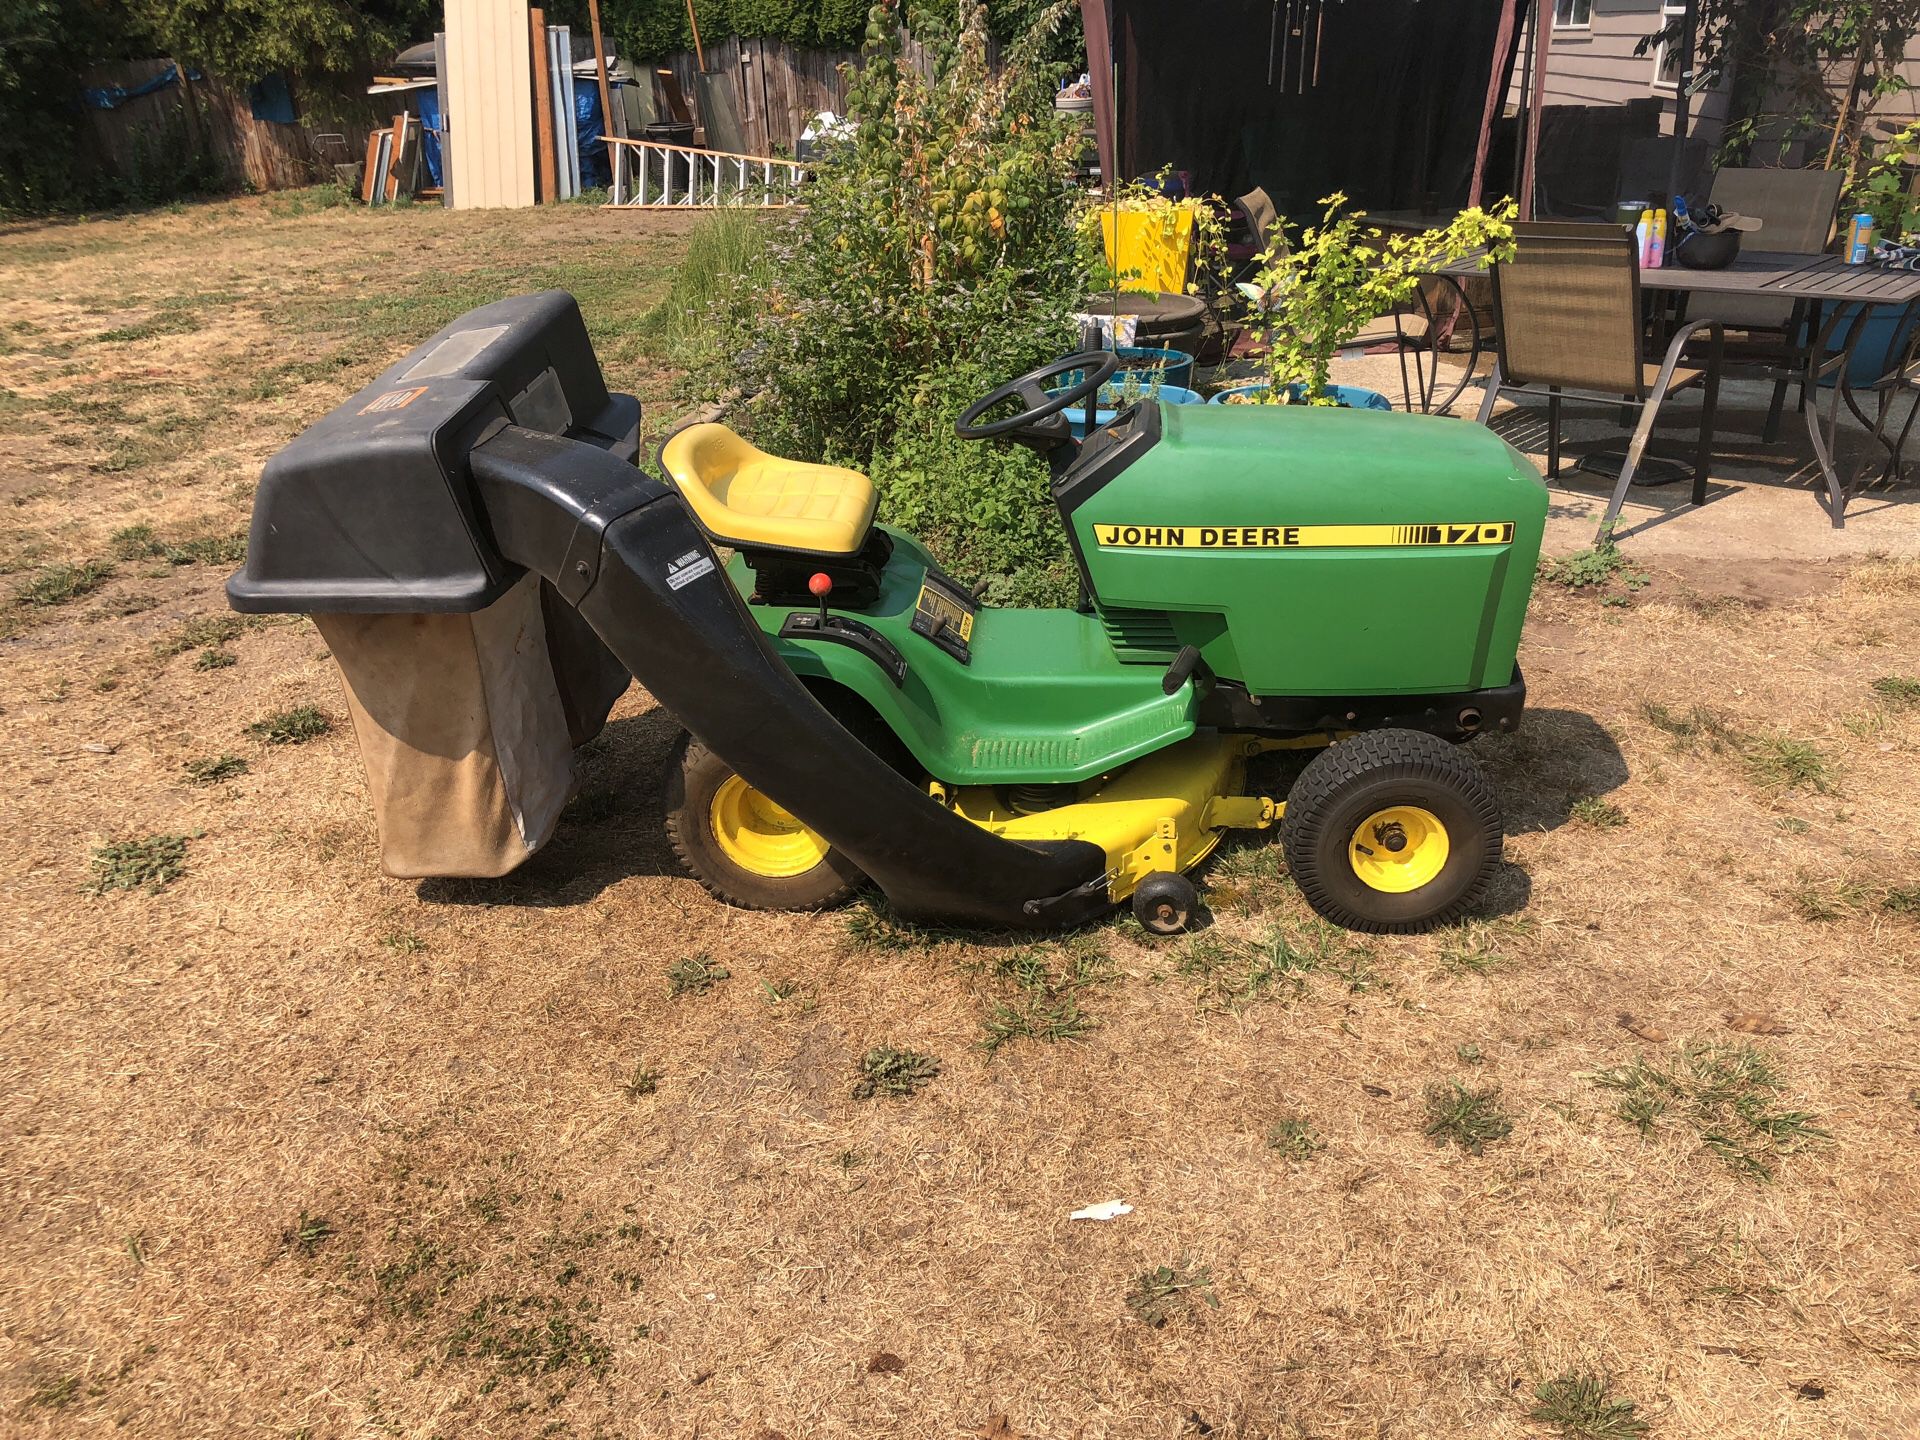 John Deere 170 Riding Lawn Mower with Bags